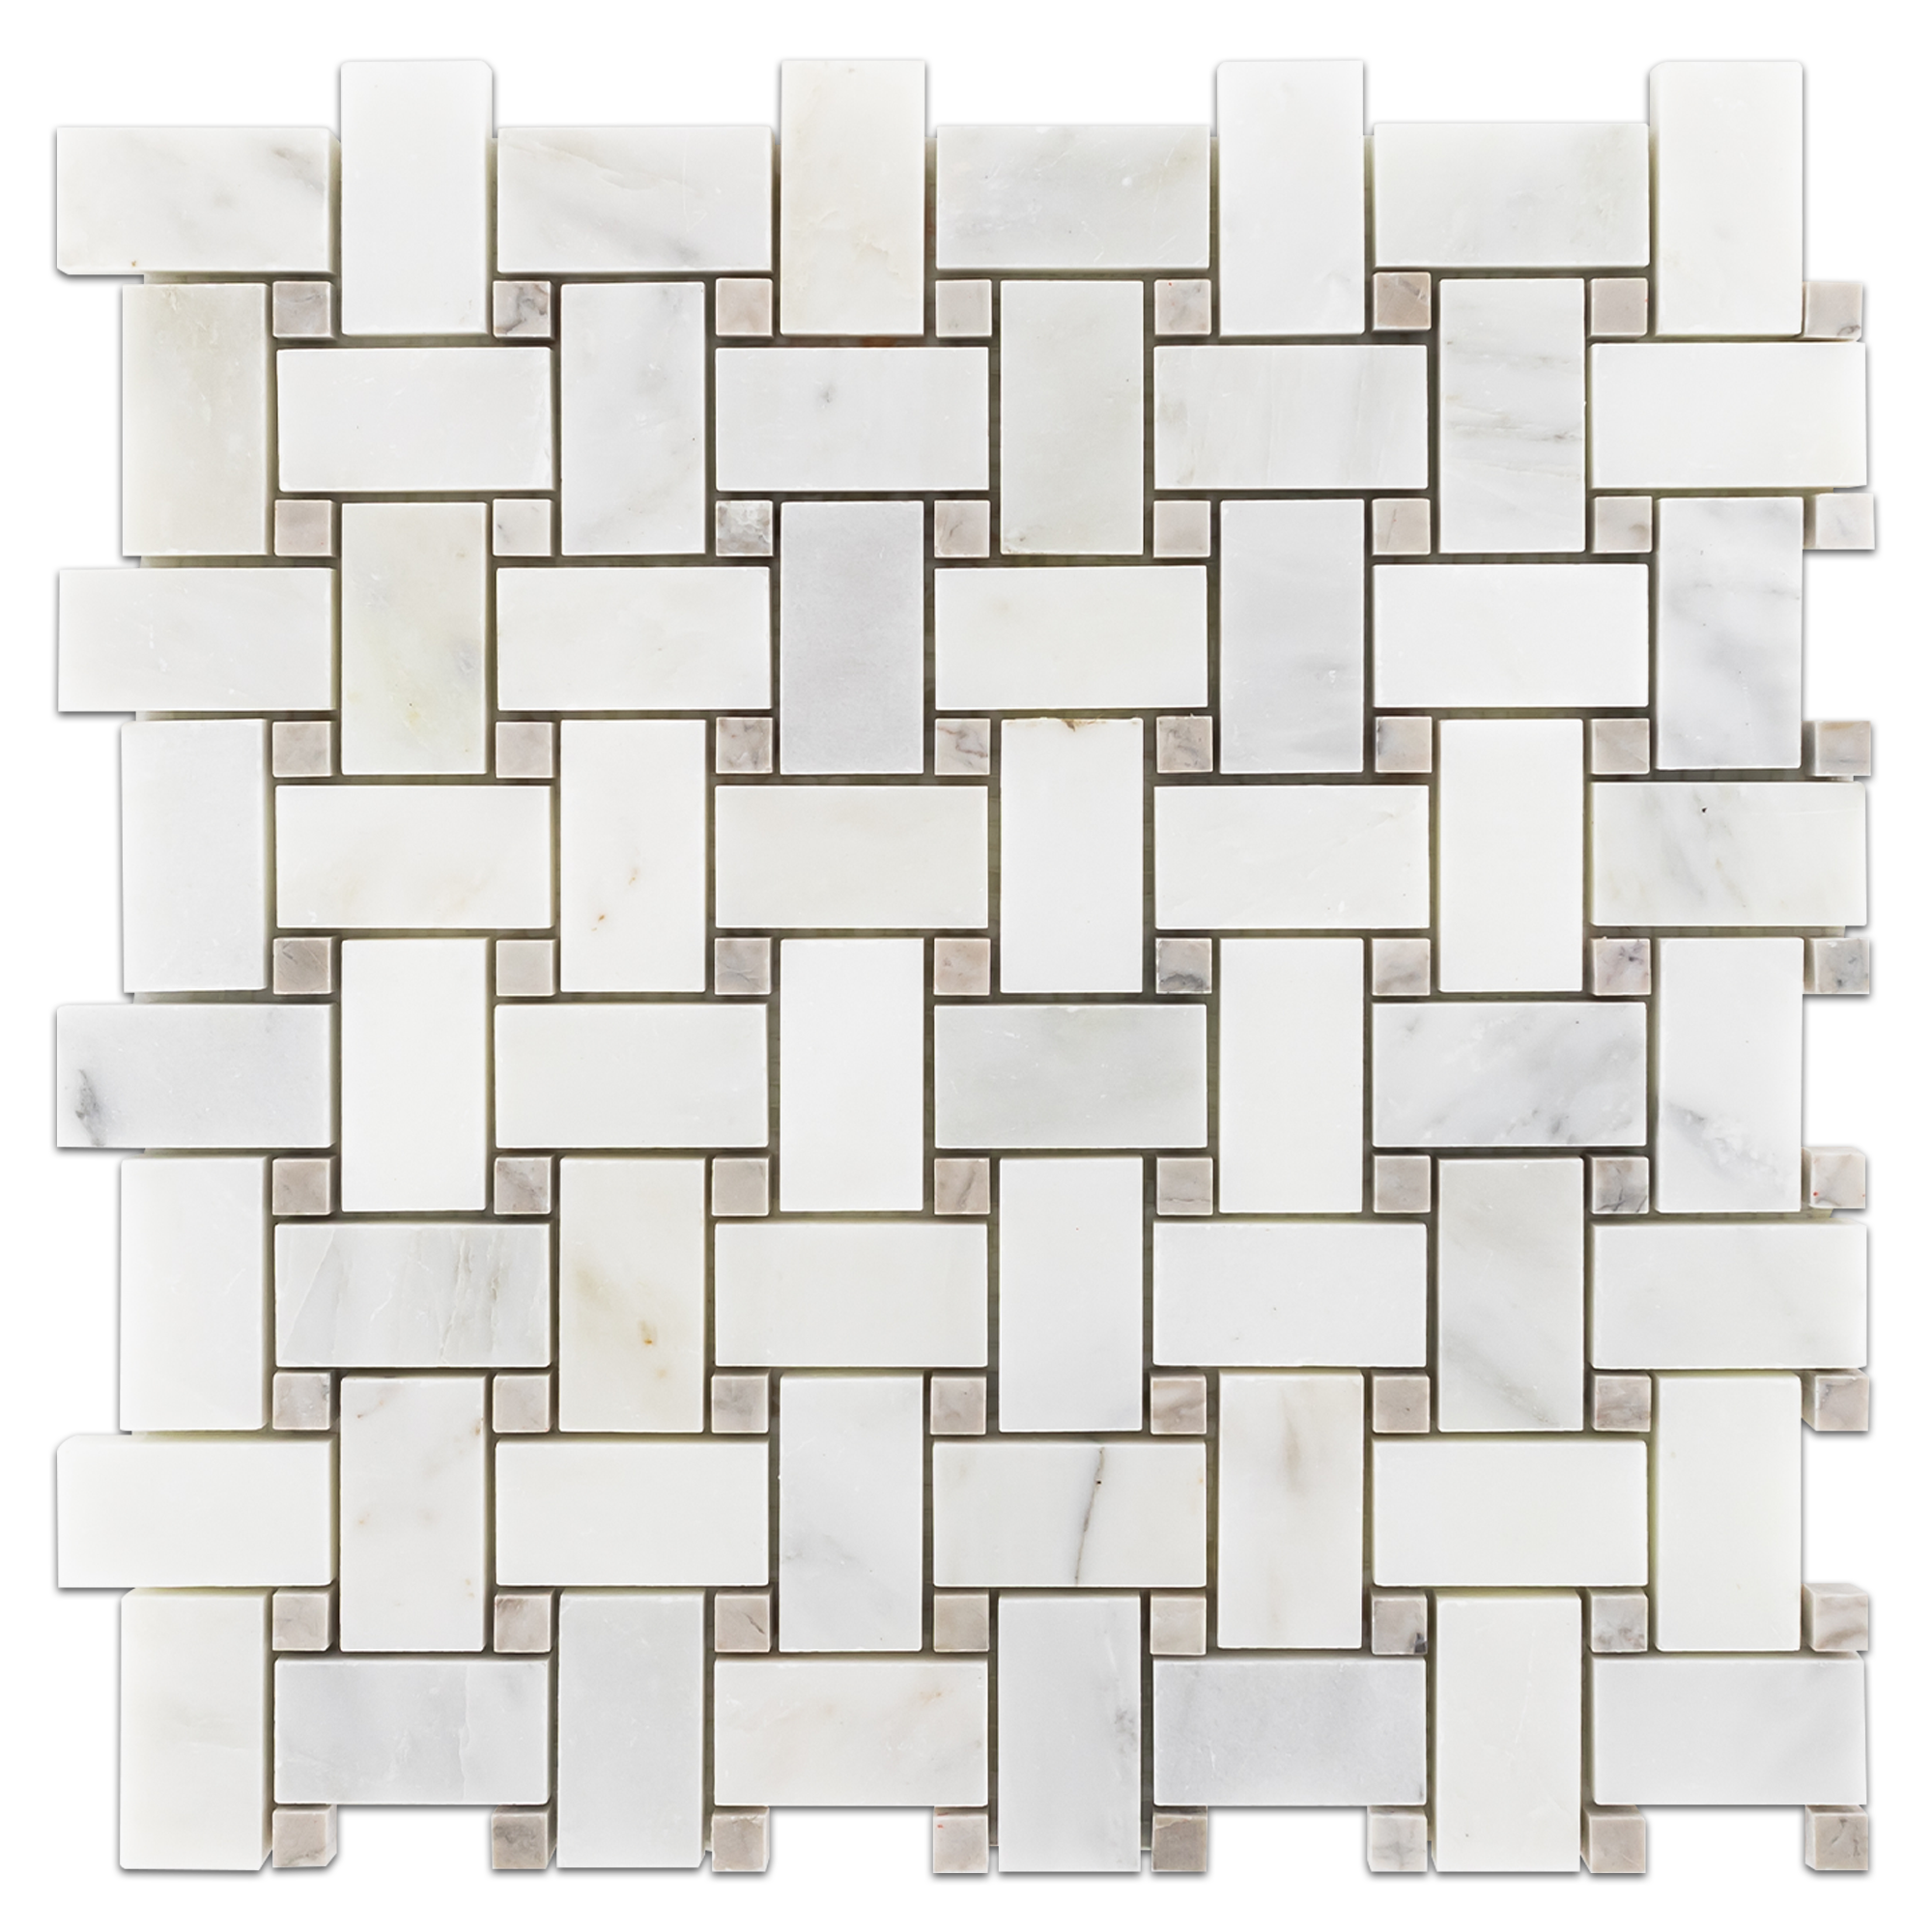 Elon Pearl White Temple Grey Marble Stone Blend Basketweave Field Mosaic 12x12x0.375 Honed AM1098H Surface Group International Product